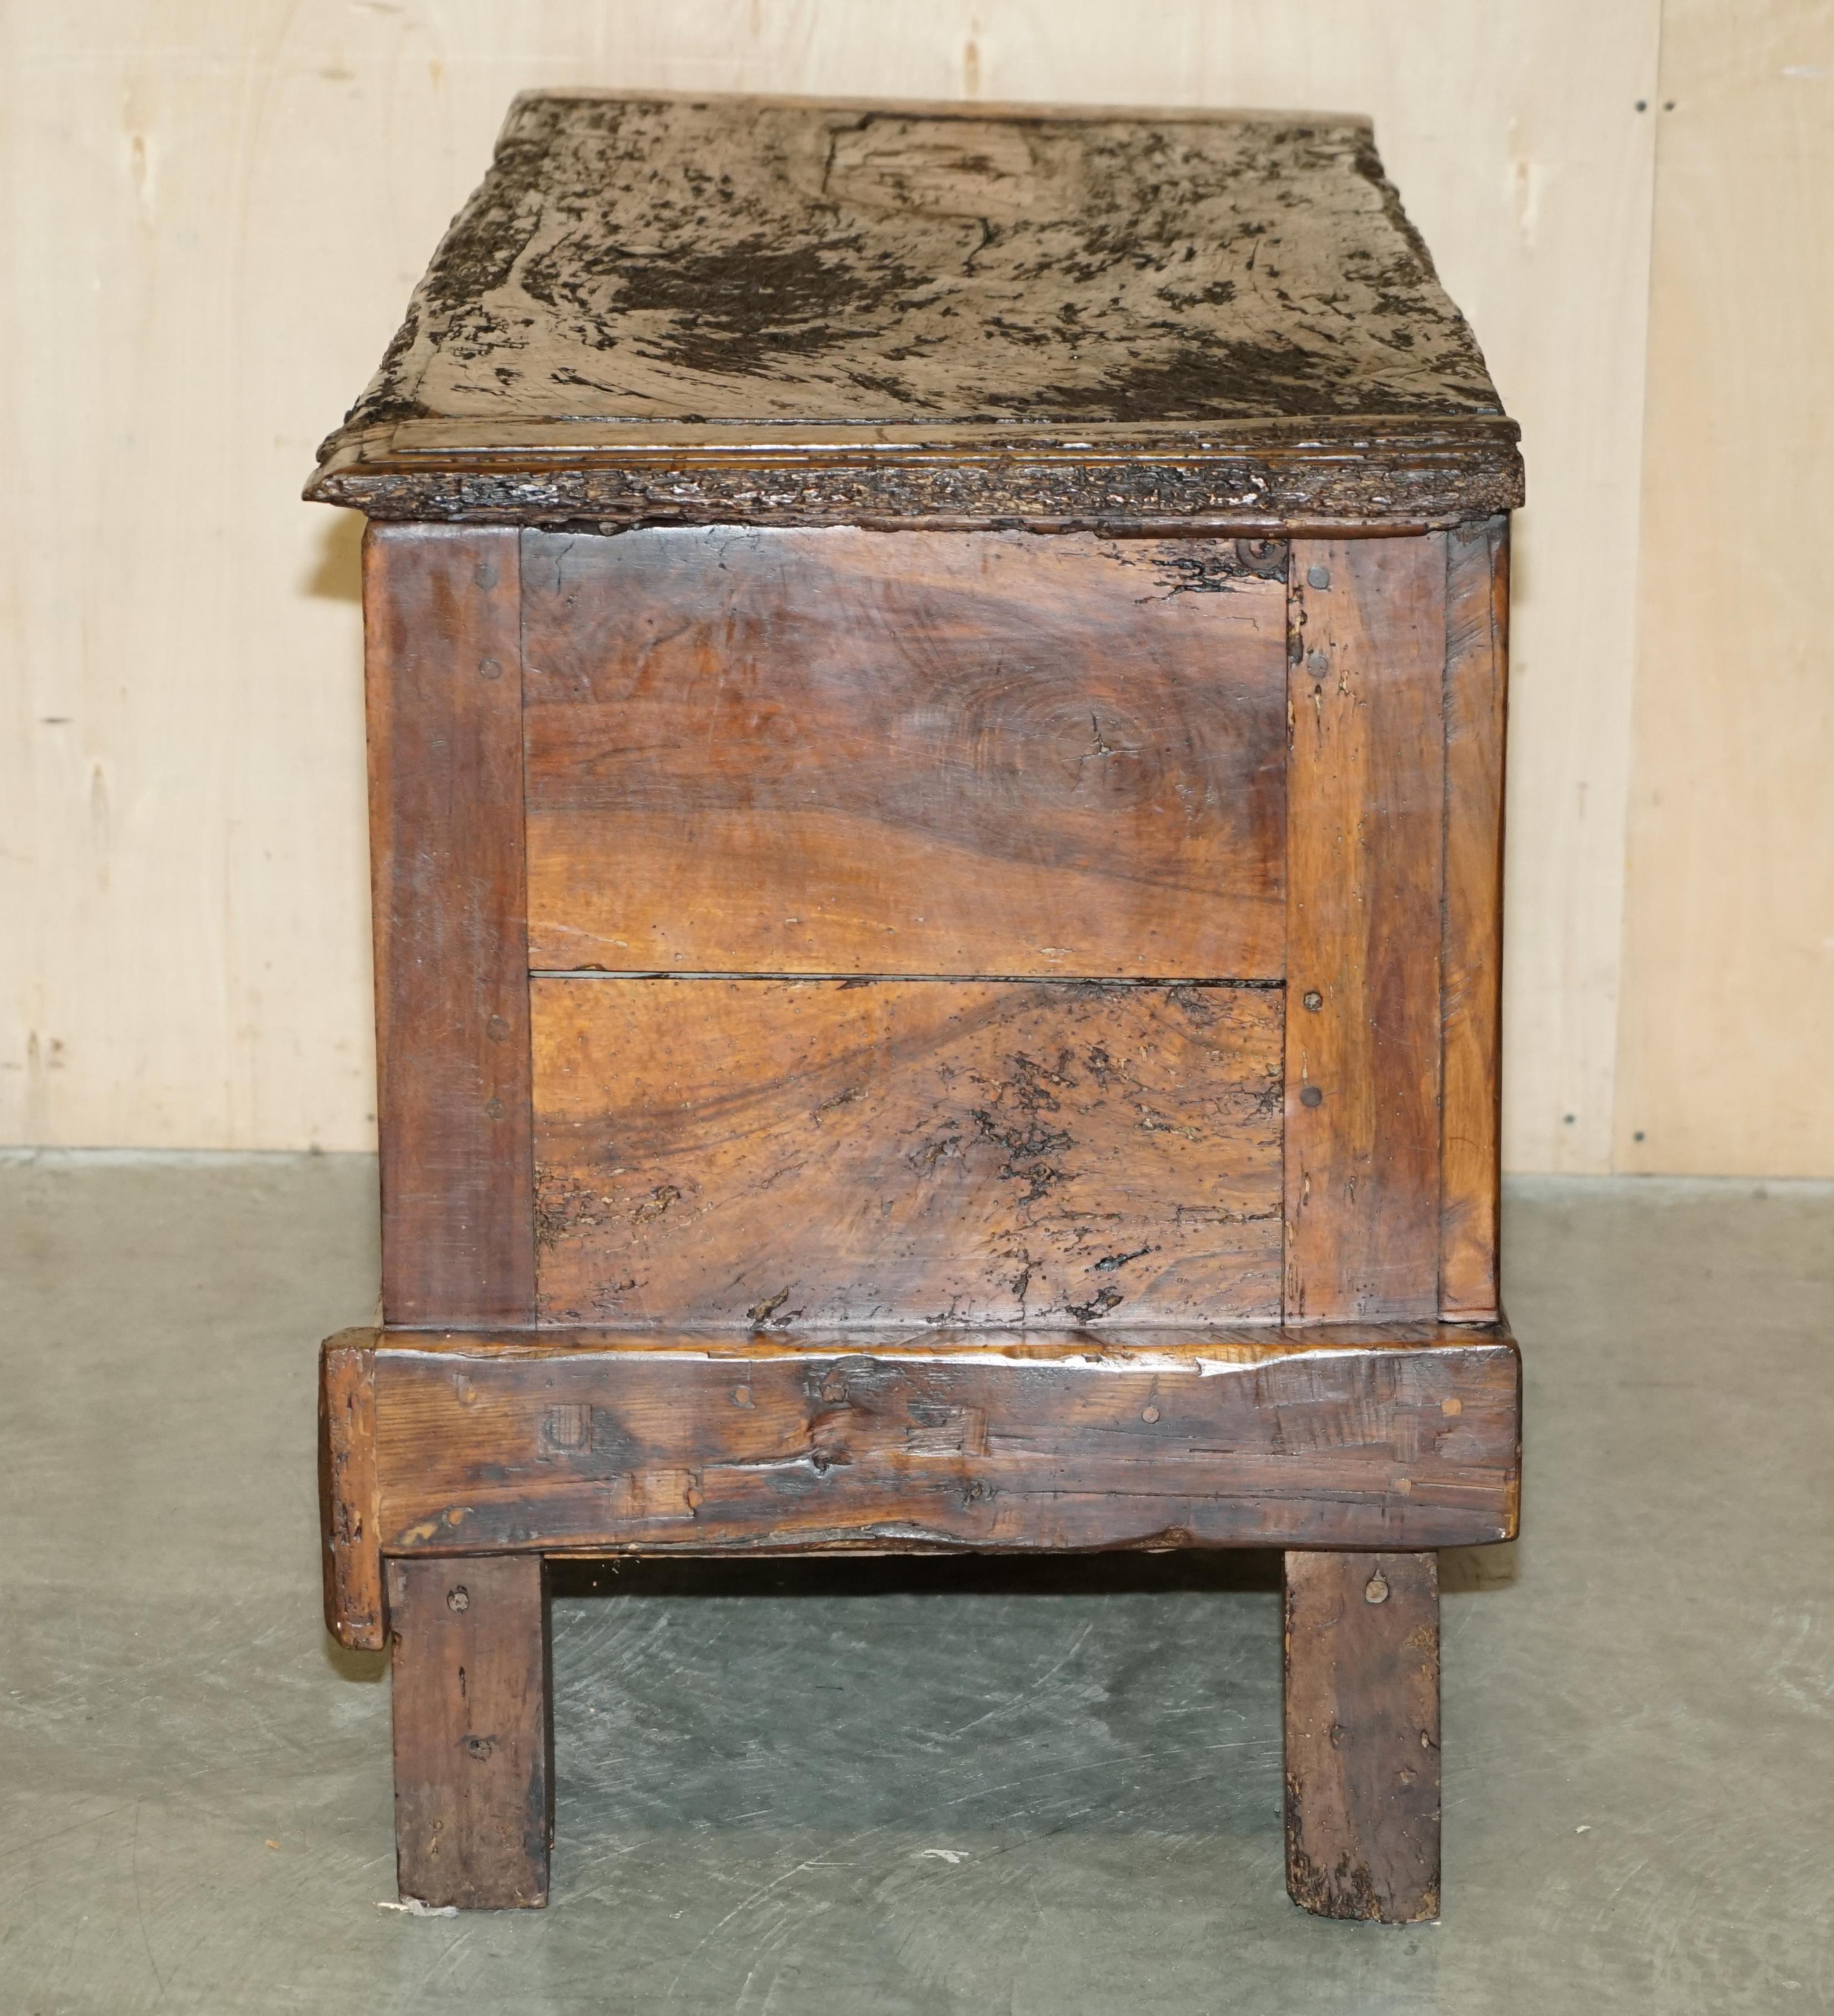 ANTiQUE 18TH CENTURY SIX PLANK HEAVILY BURRED CHESTNUT WOOD TRUNK CHEST For Sale 11